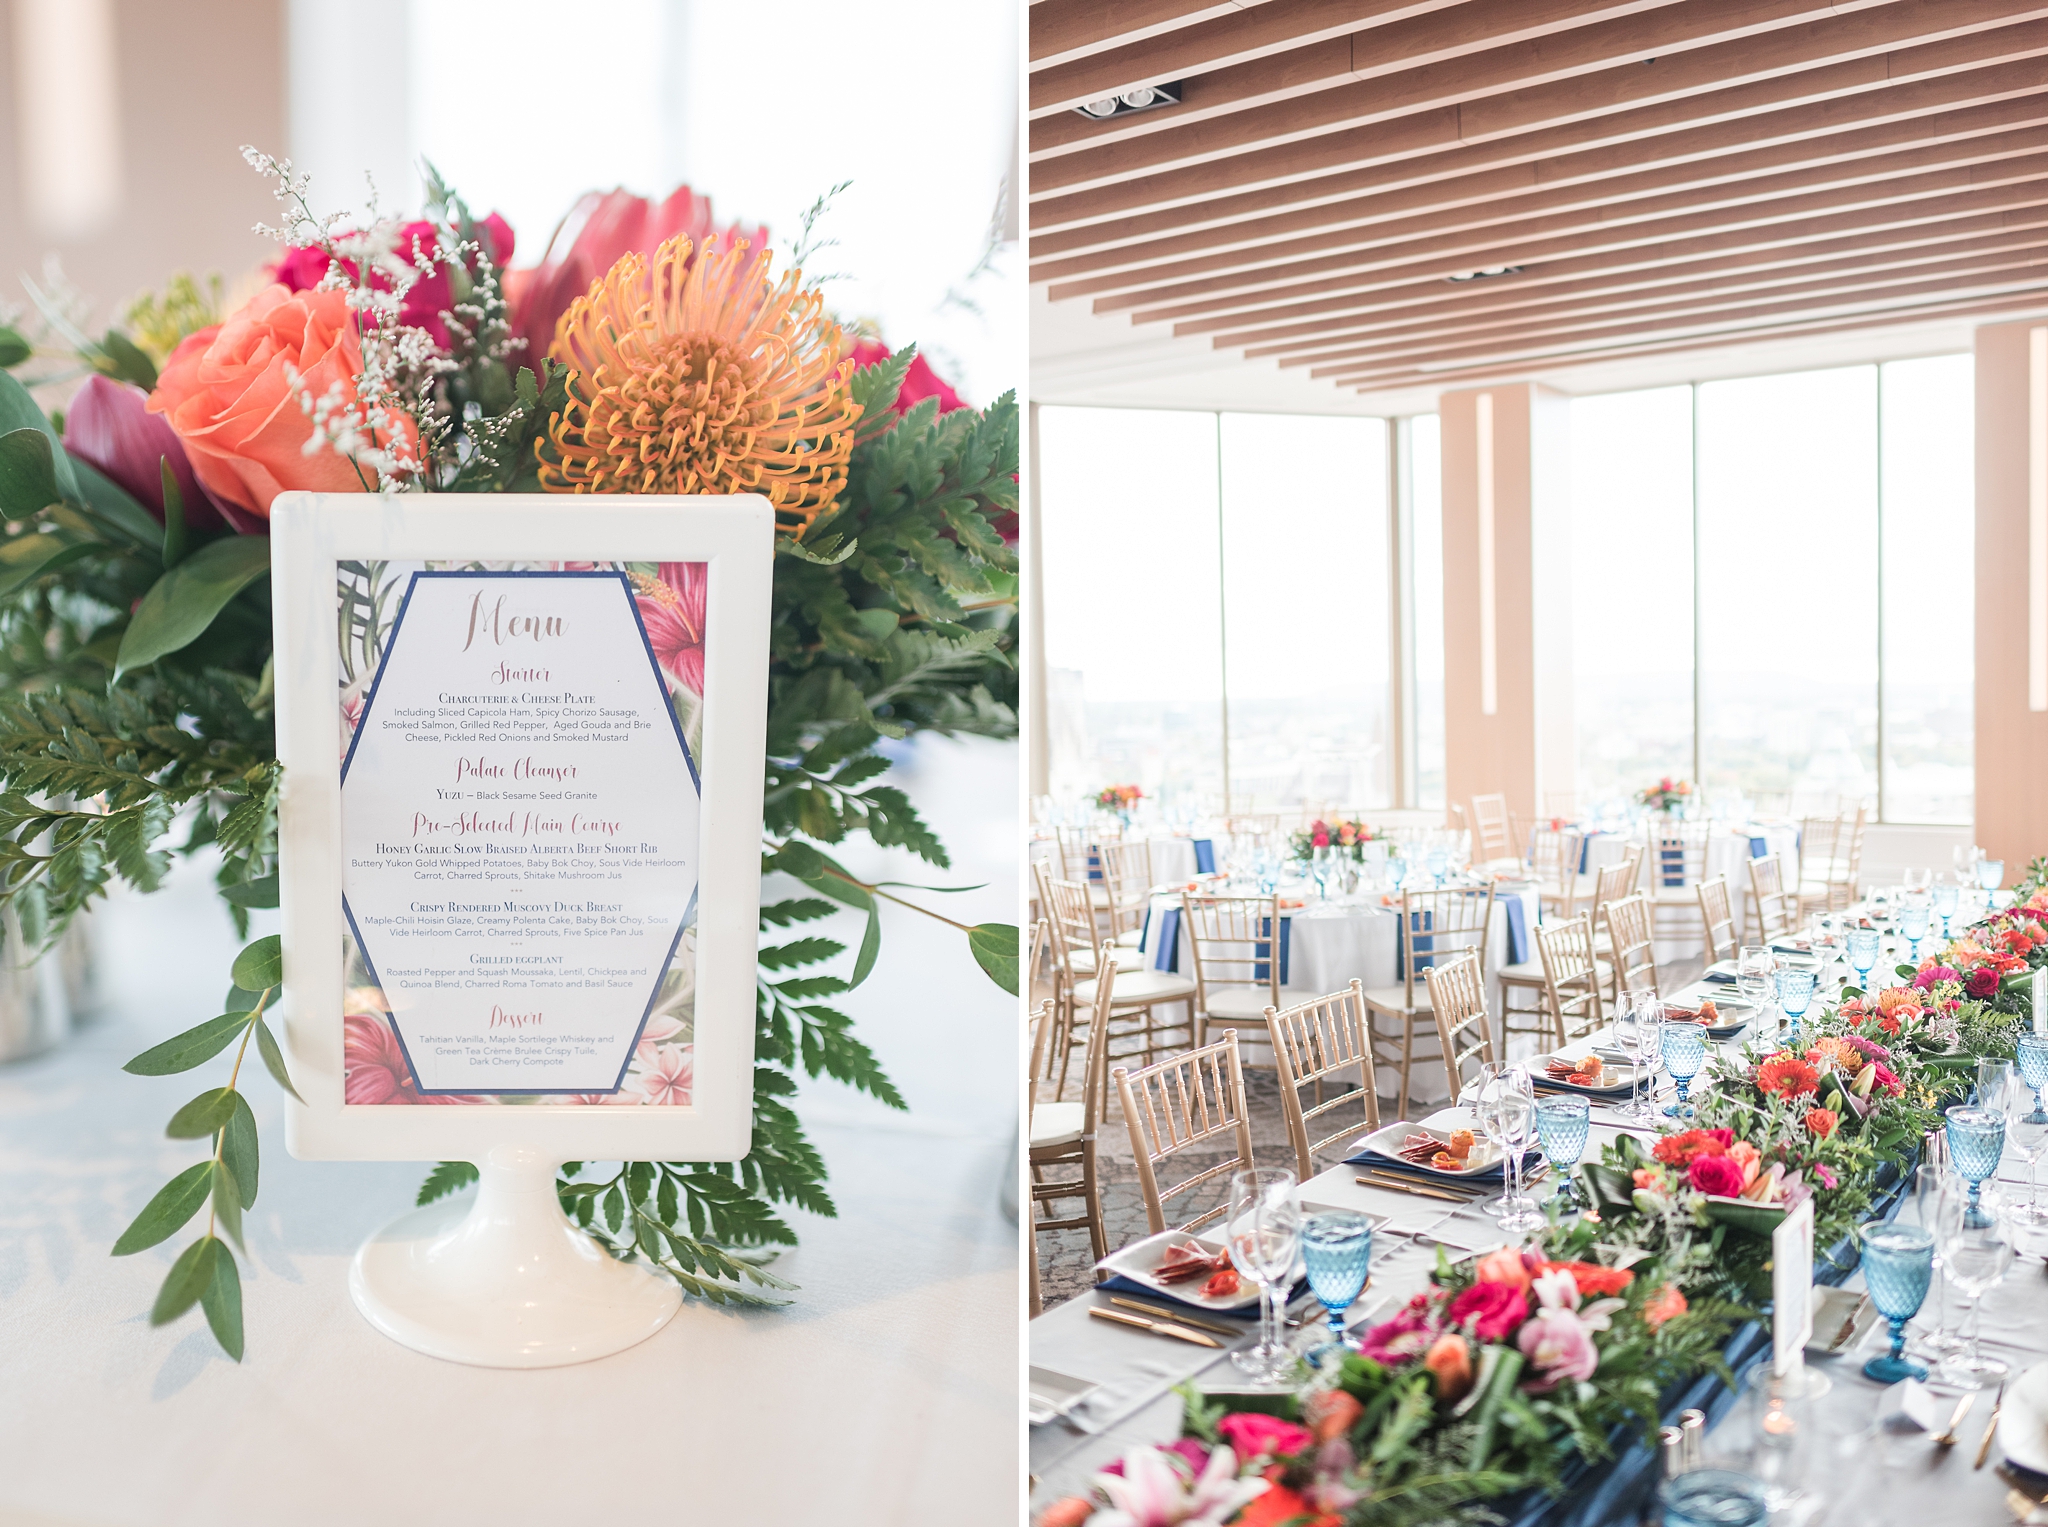 Autumn Bold, Colourful Wedding at TwentyTwo | Ottawa Wedding | Wedding photos at The Westin Ottawa downtown Get more inspiration from this bright autumn wedding. #ottawawedding #weddingphotography #ottawaweddings